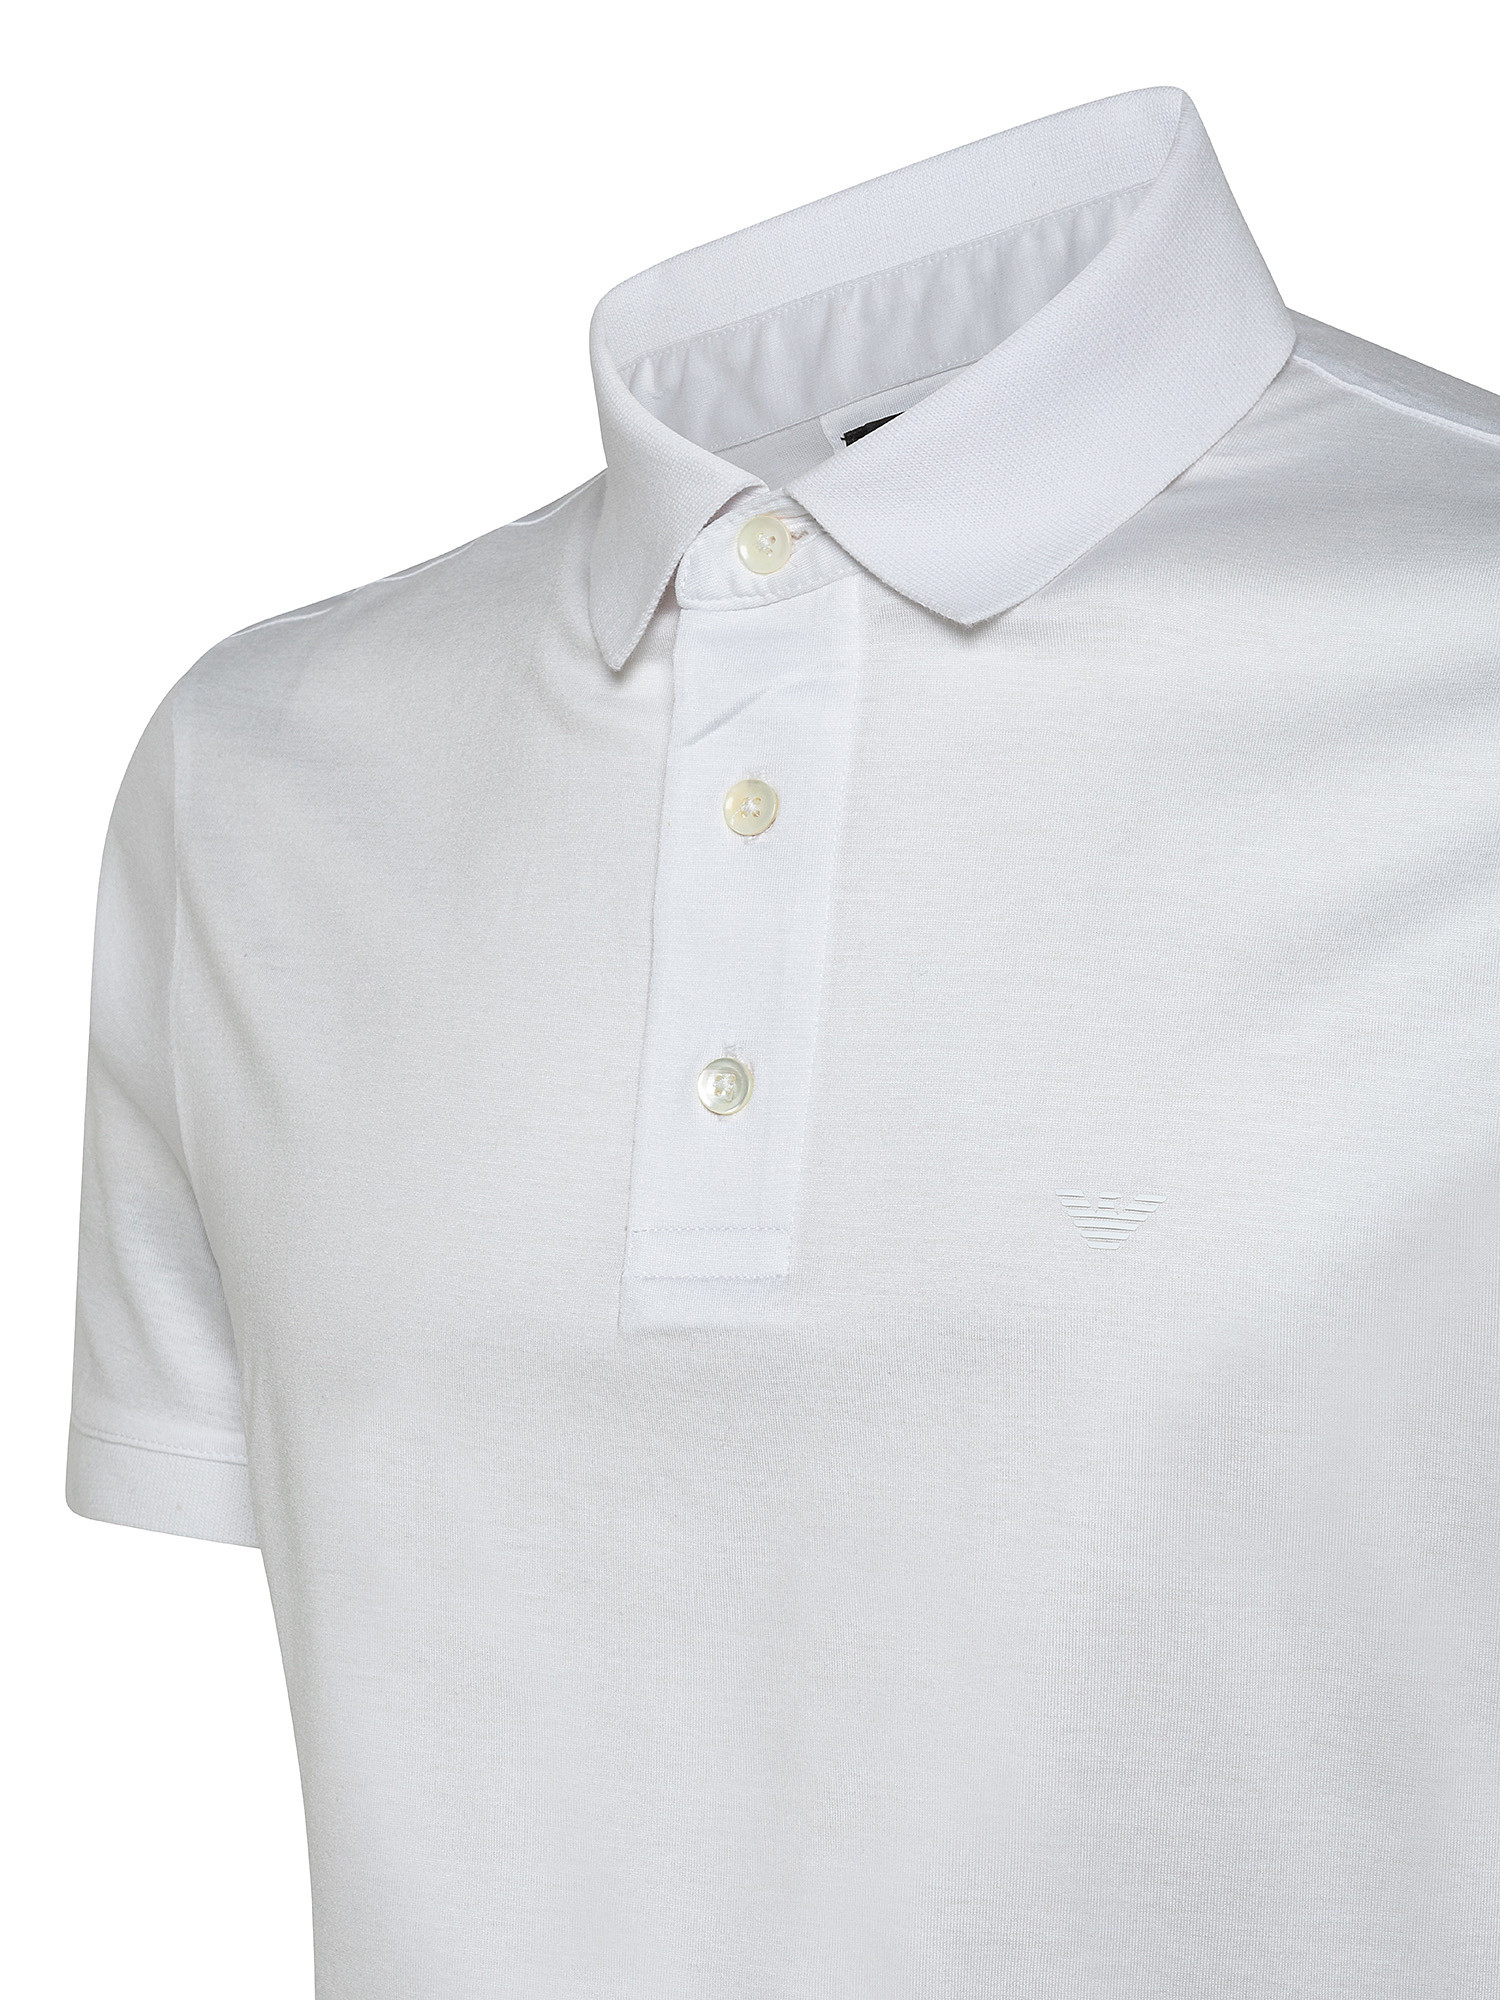 Polo, White, large image number 2